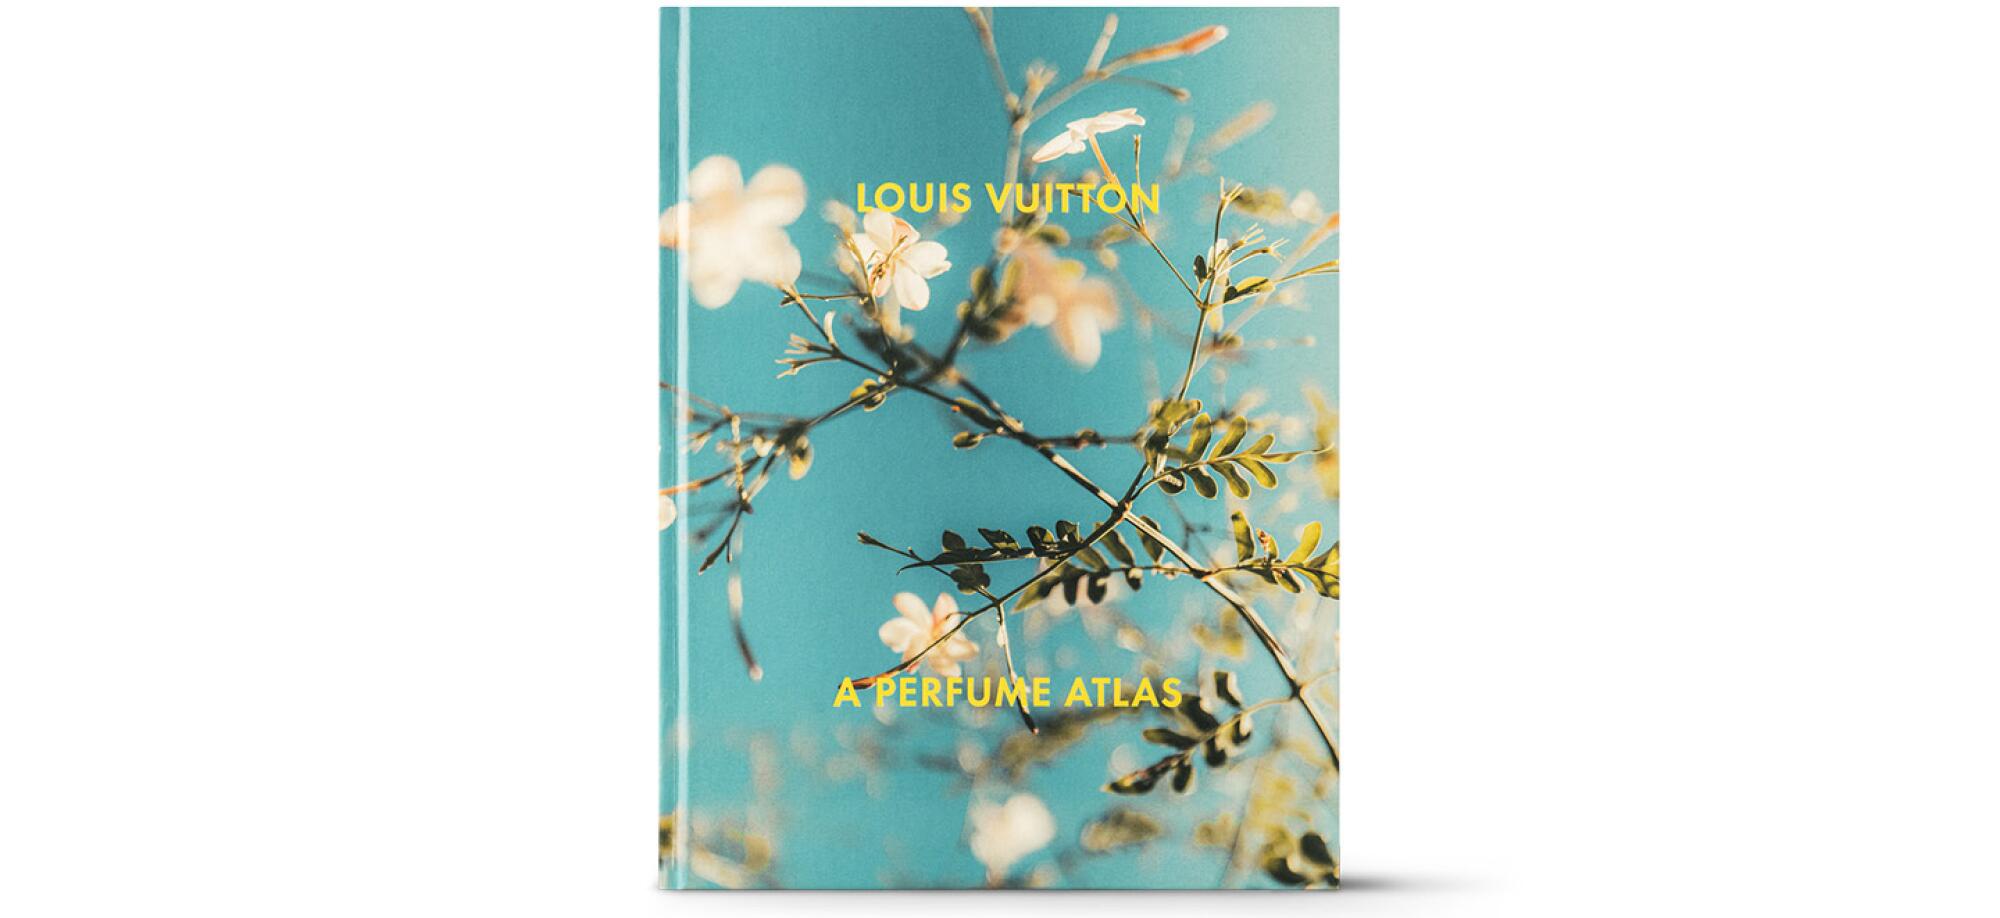 The cover of a book from Louis Vuitton.